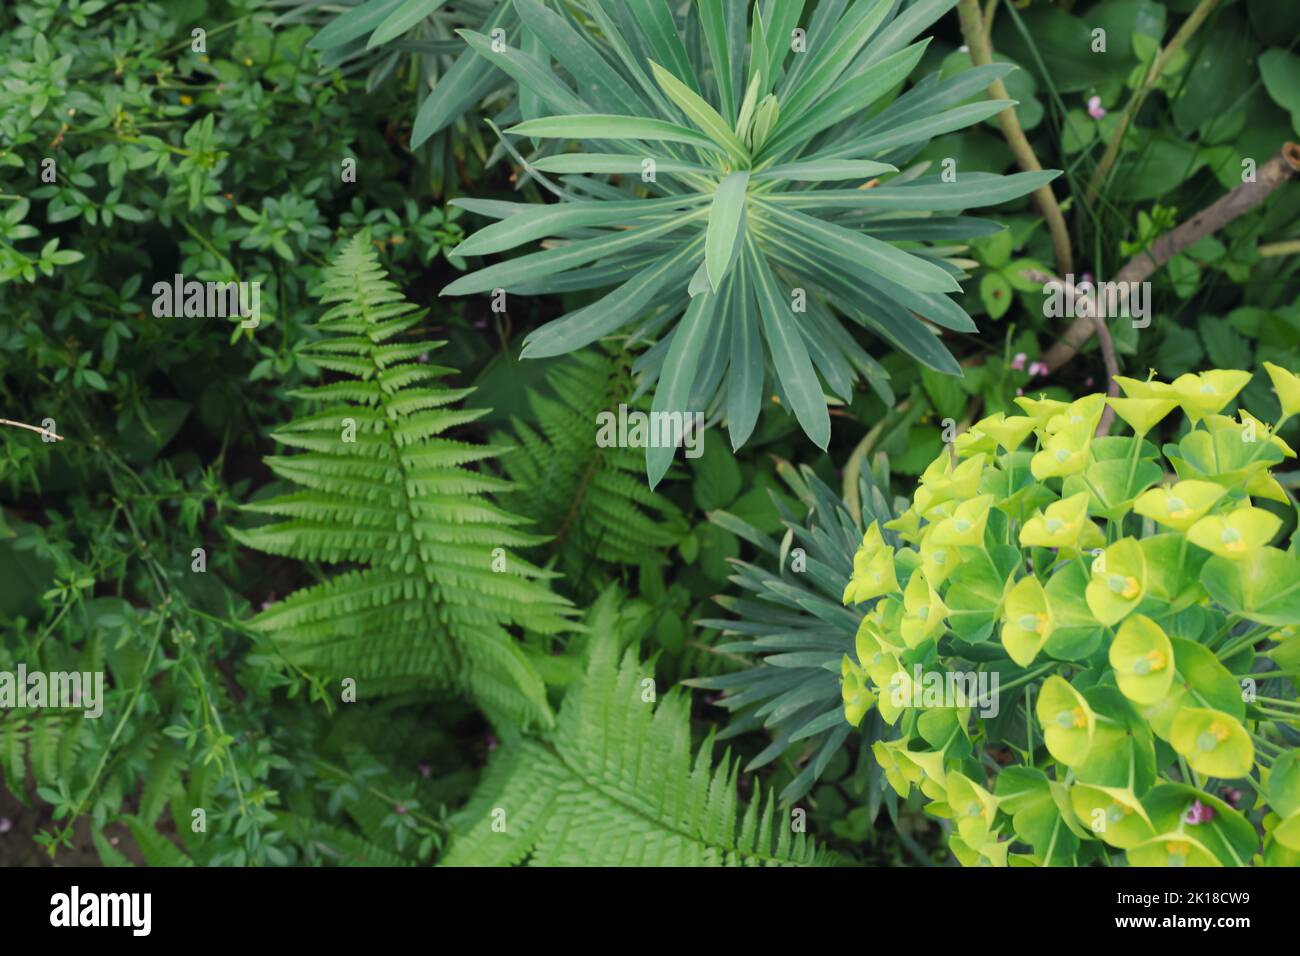 Green plants, yellow flower Euphorbia lathyris with Cercis siliquastrum and other plants in nature. Beautiful background. Stock Photo